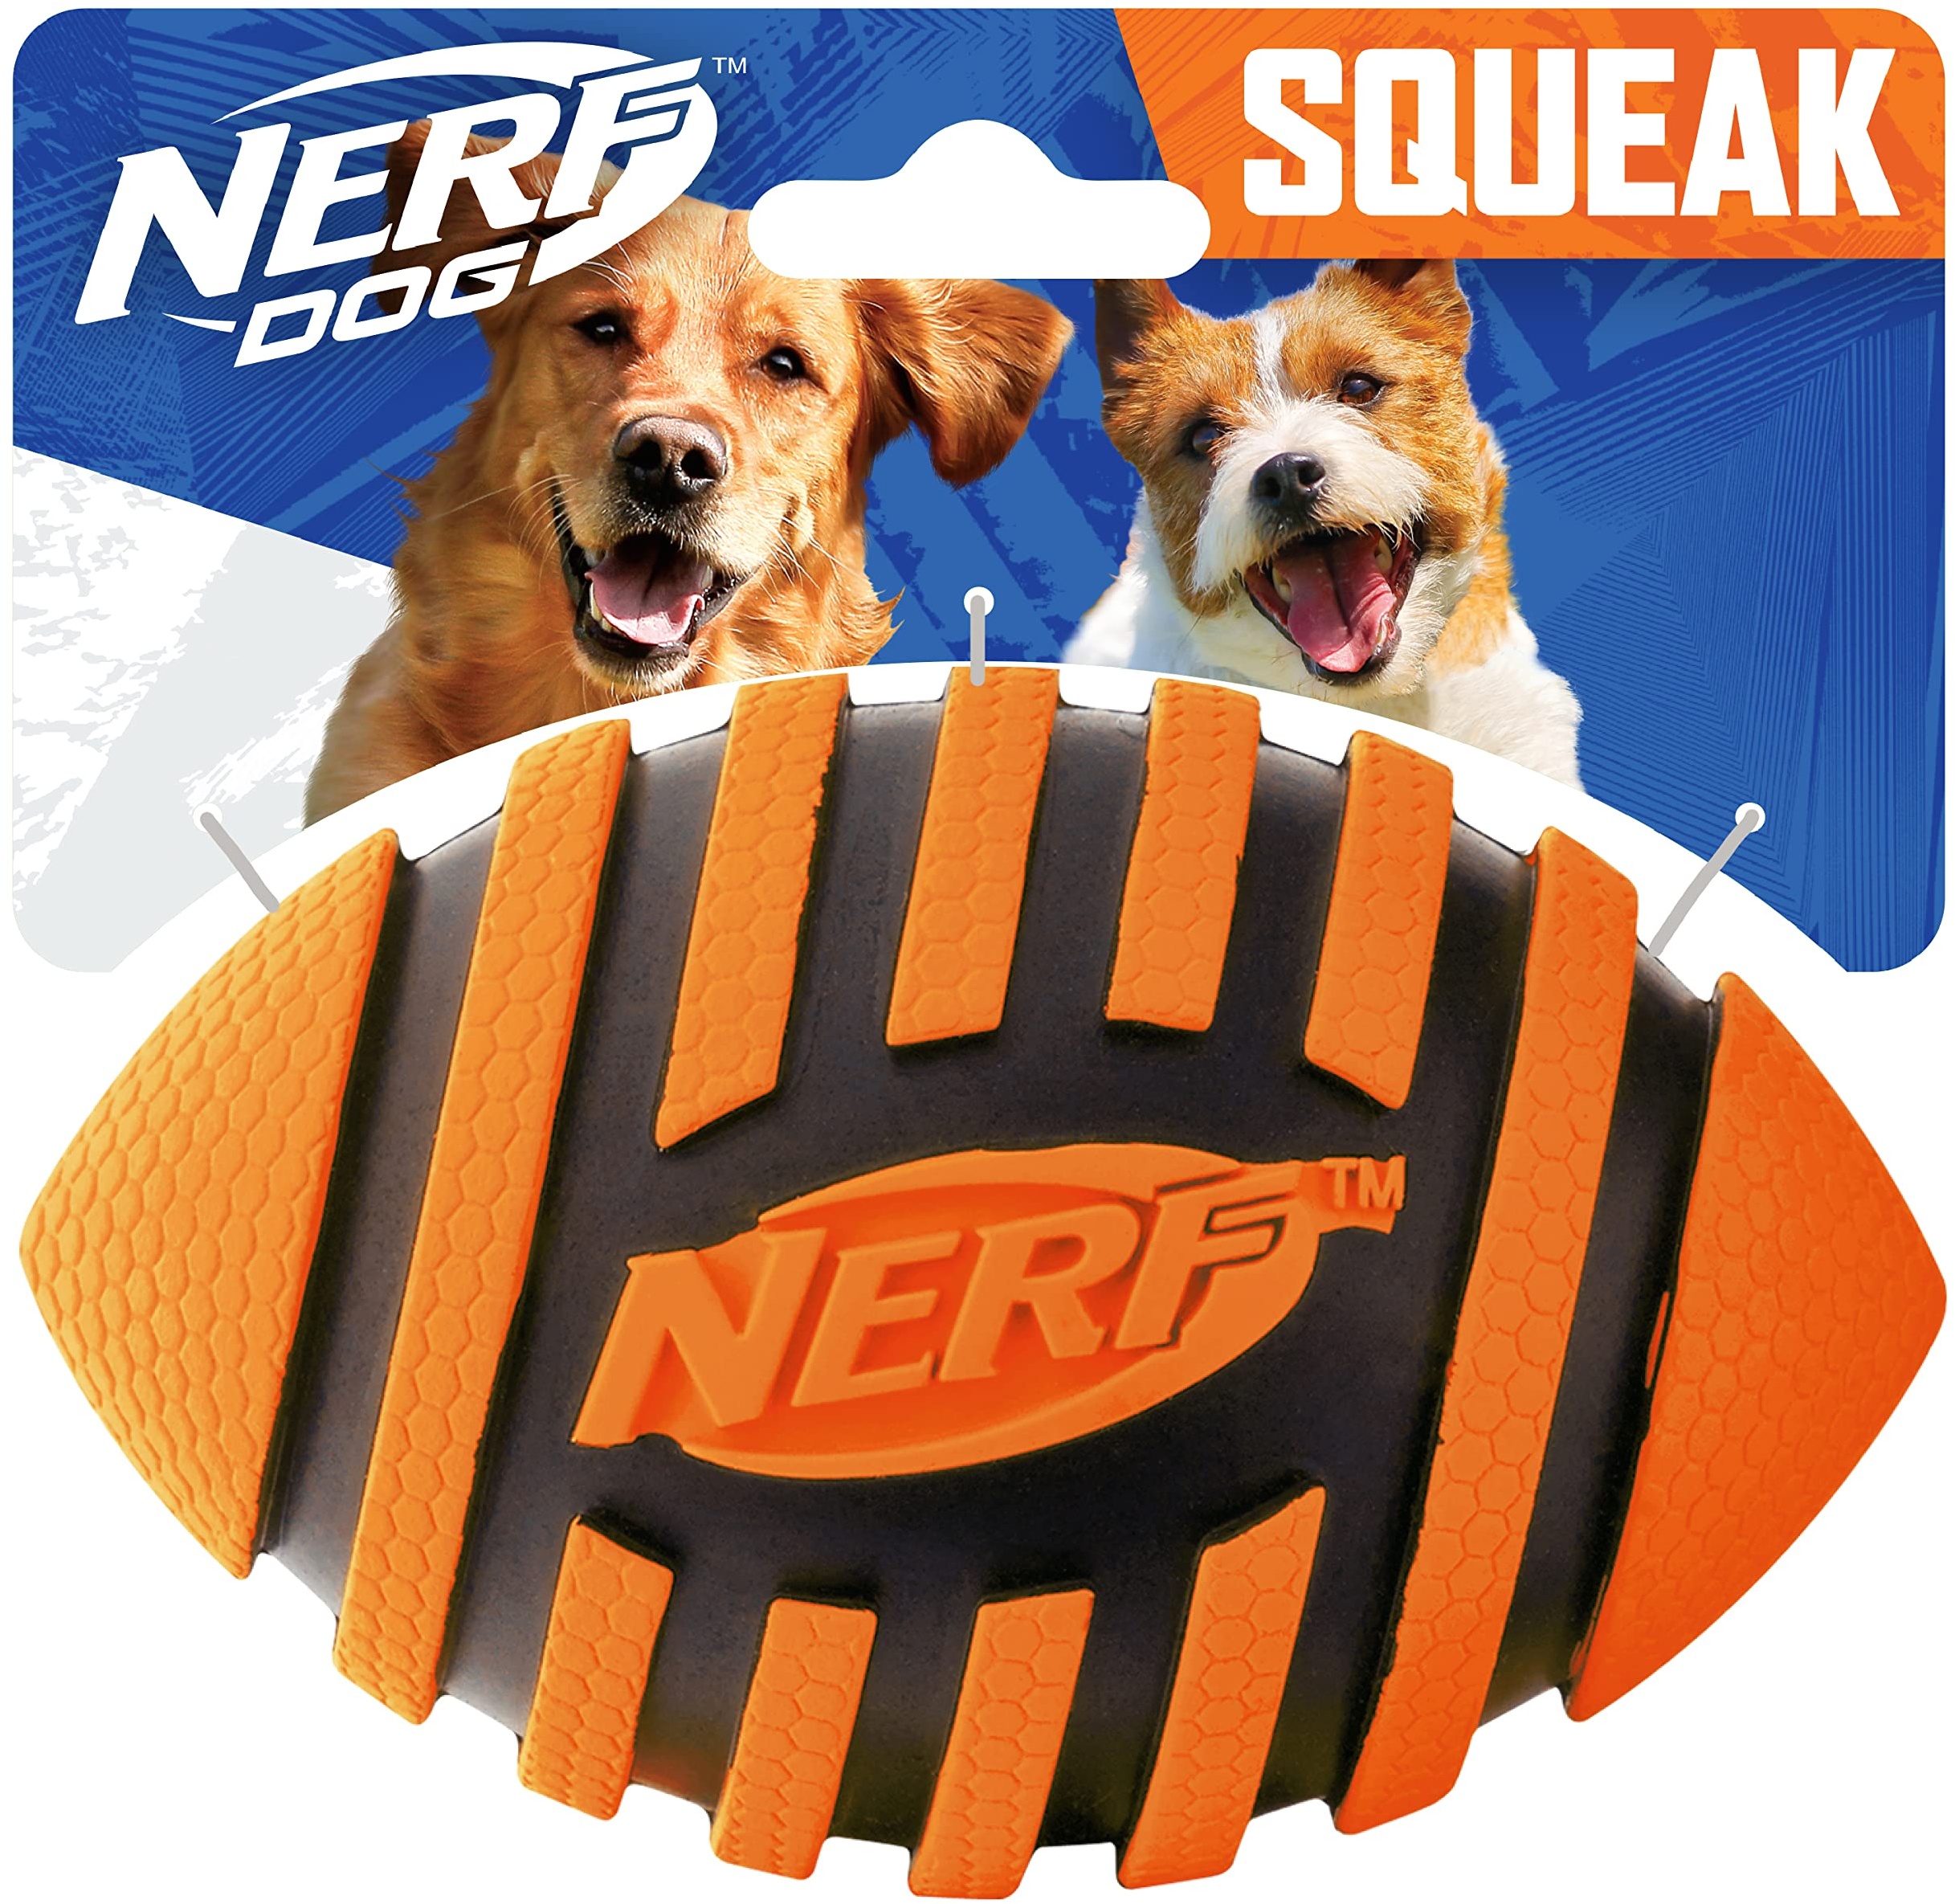 Hasbro Nerf Dog Rubber Football Dog Toy with Spiral Squeaker, Lightweight, Durable and Water Resistant, 5 Inch Diameter for Medium/Large Breeds, Single Unit, Orange (8915)